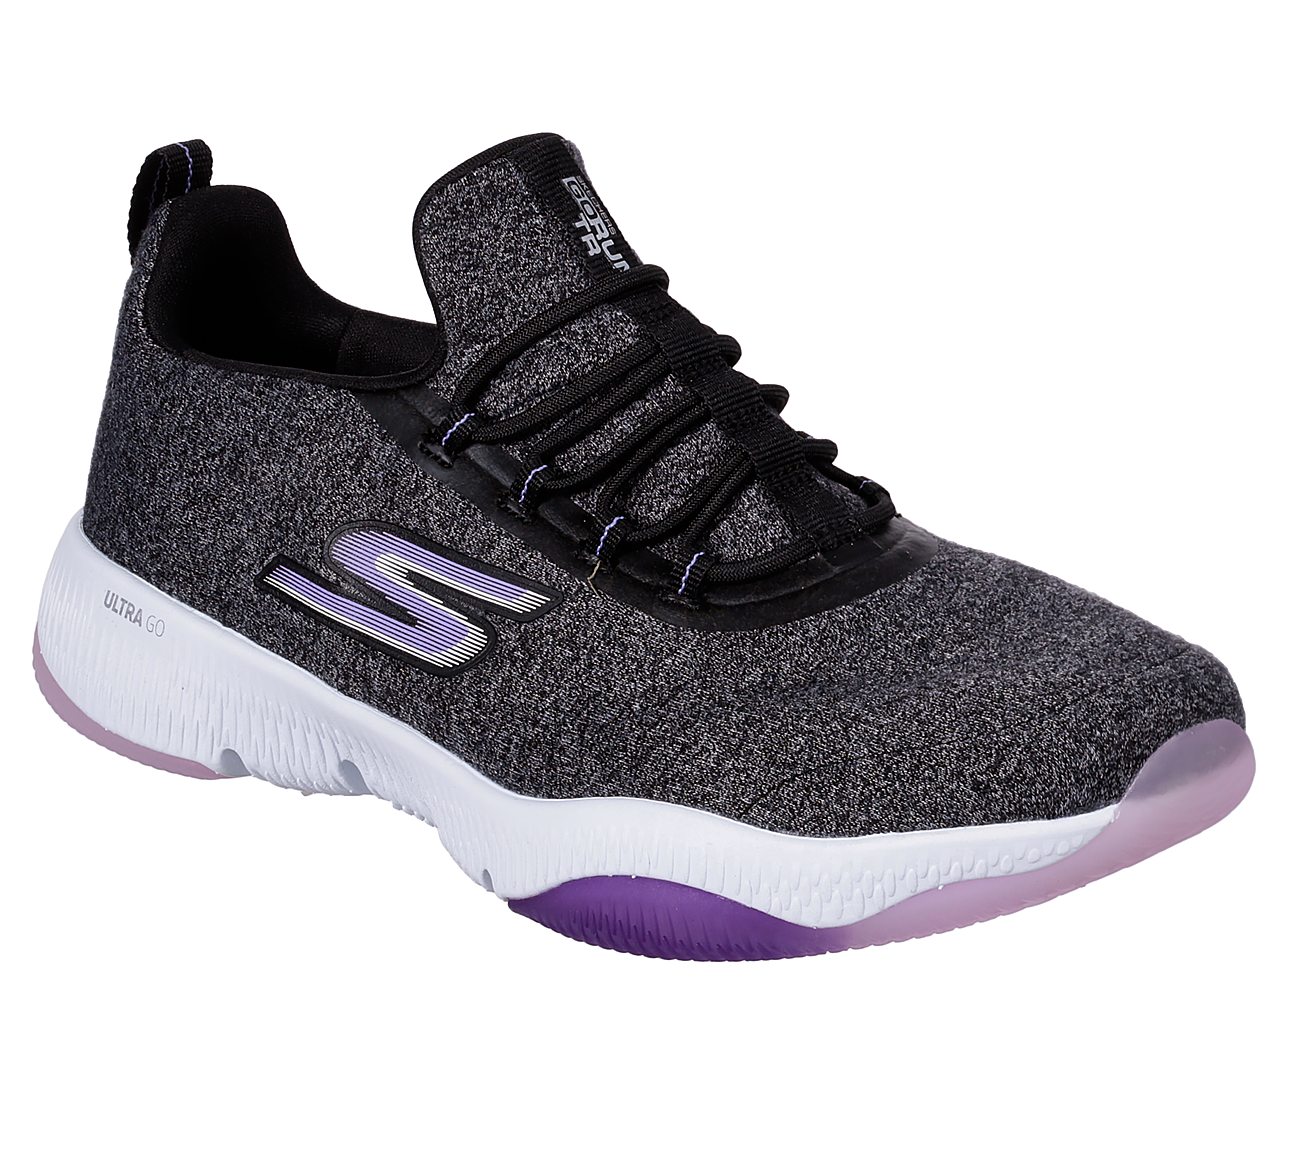 GO RUN TR- EXCEPTION, BLACK/LAVENDER Footwear Lateral View